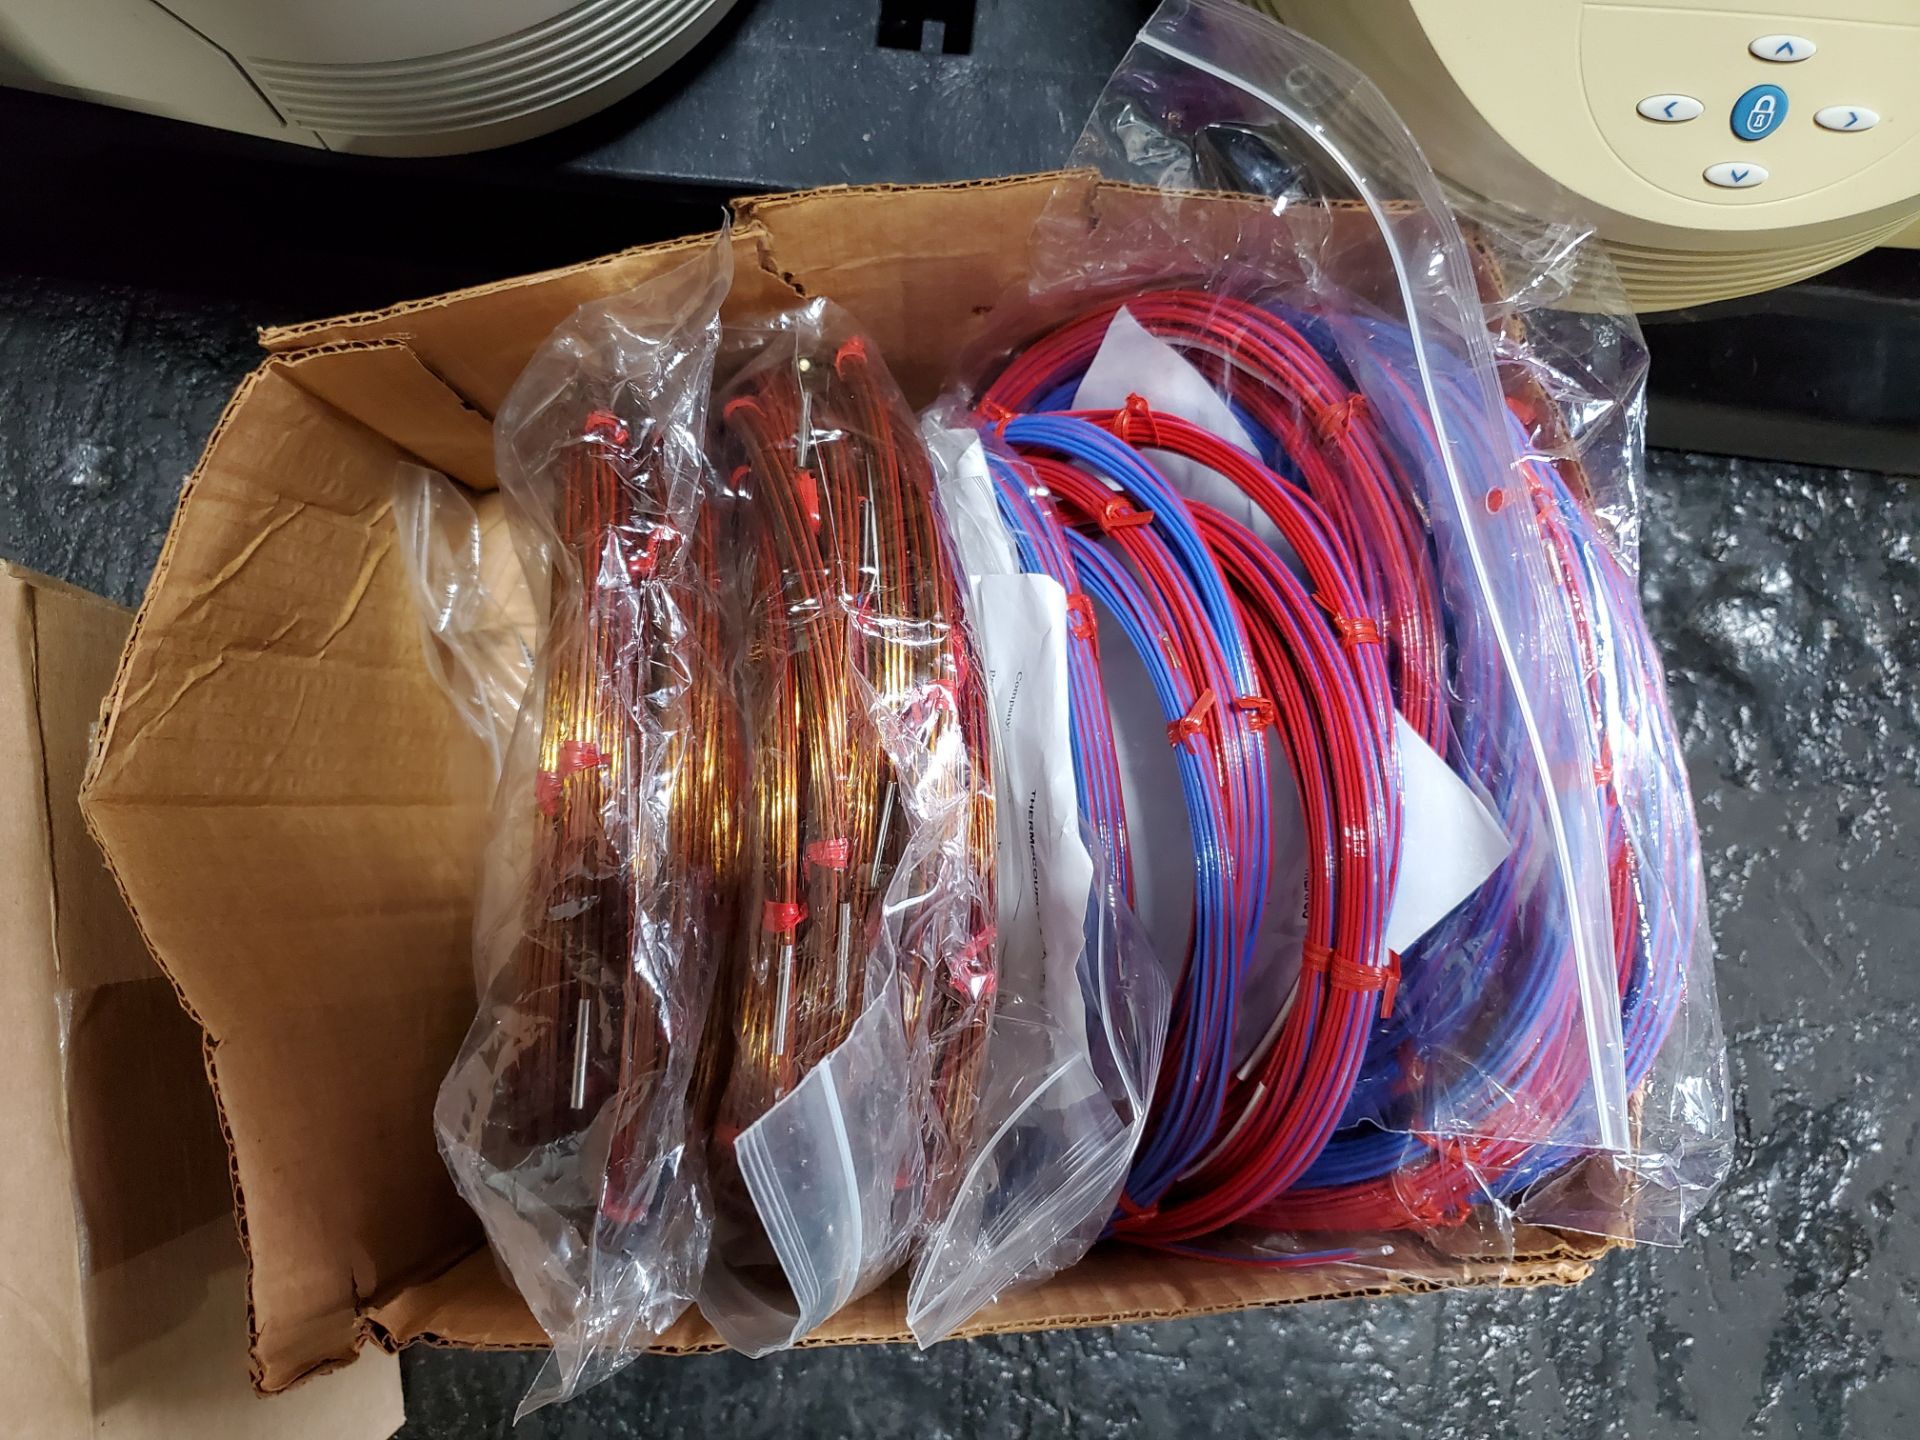 Lot of Kaye Validator wires and thermocouples, unused, both copper and red and blue wires. - Image 2 of 2